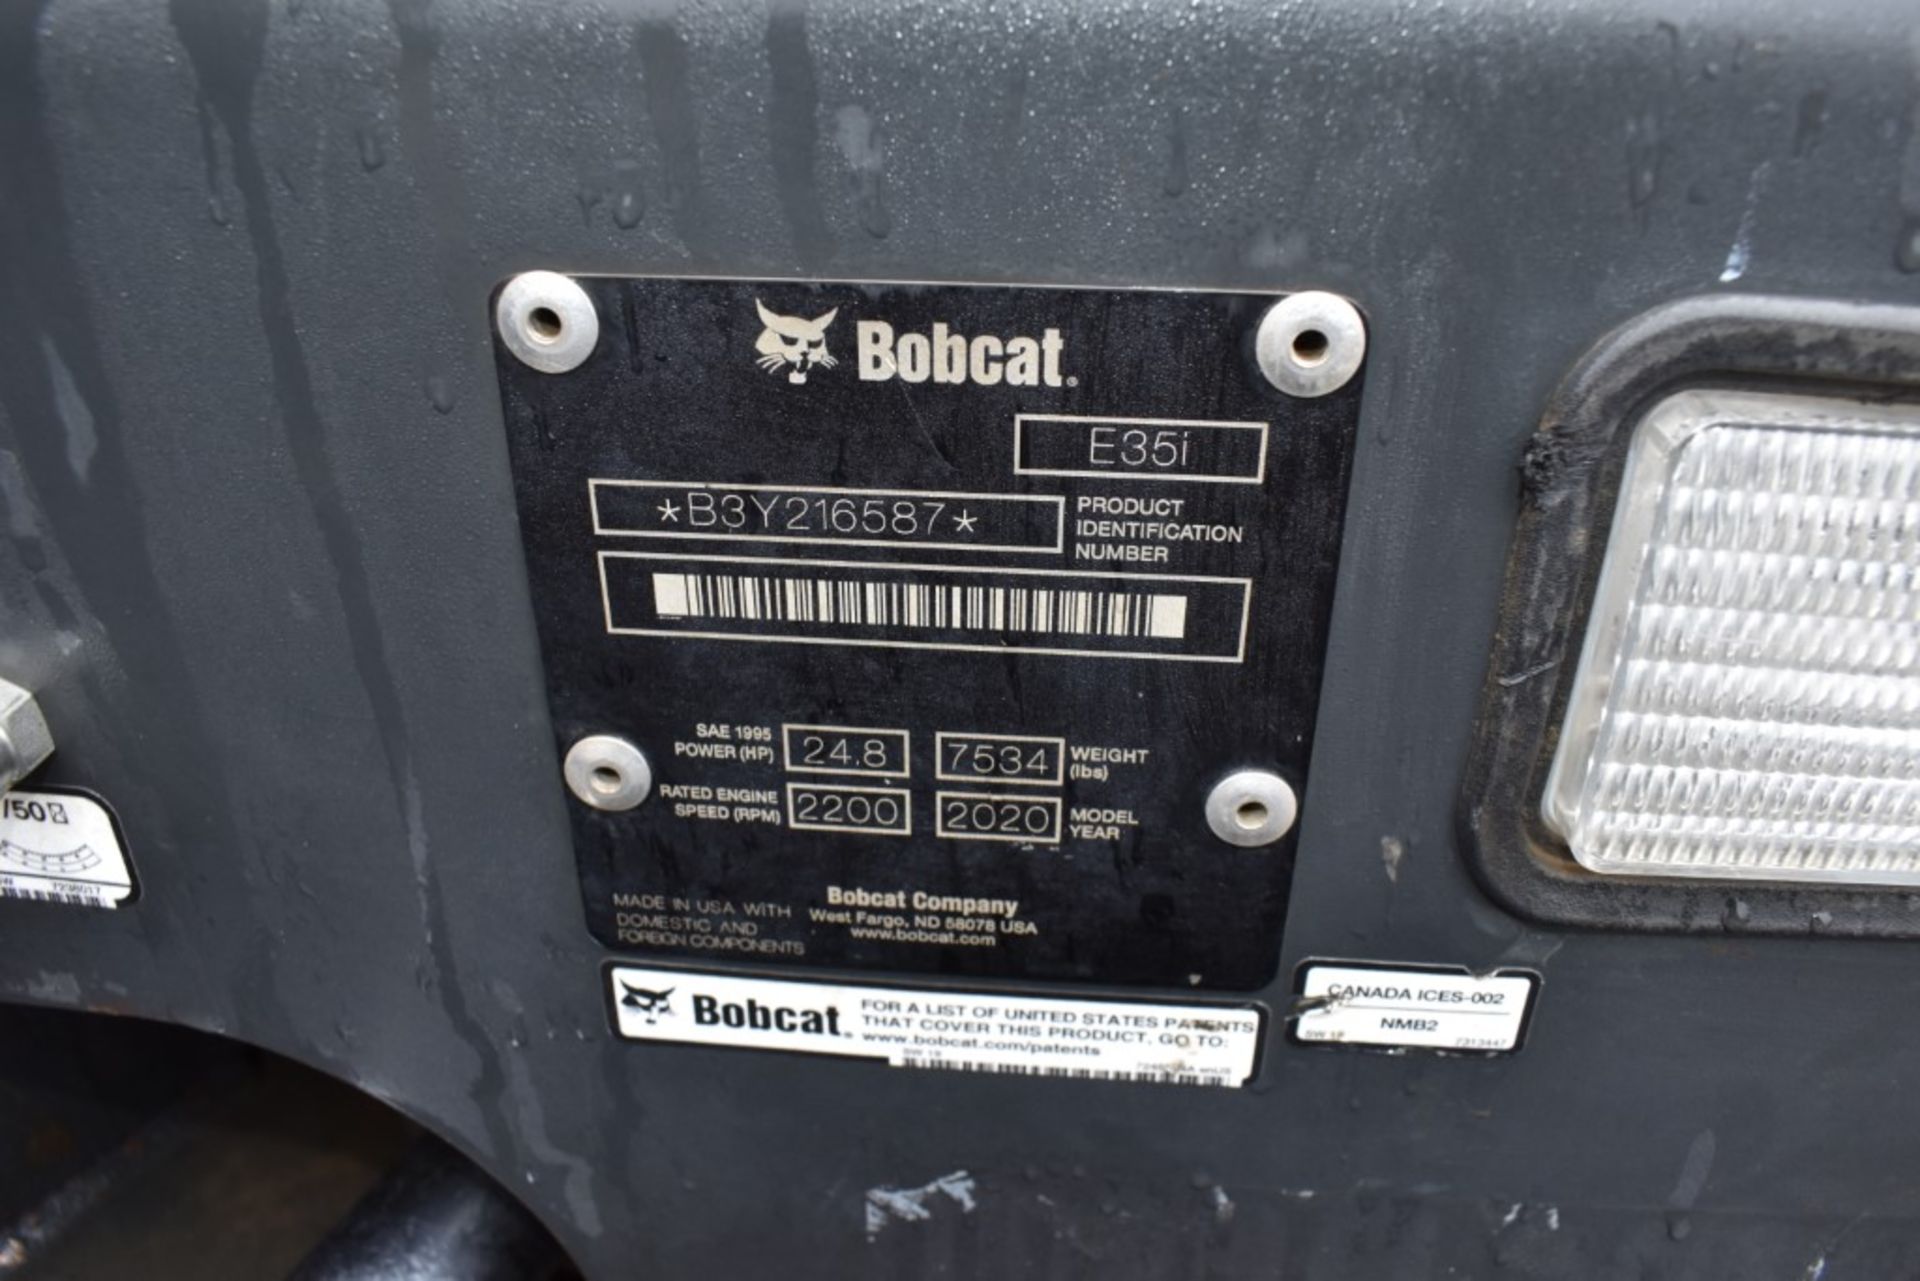 2020 Bobcat E35i Excavator 1006 Hours, Runs and Operates, 18" Bucket, Dual Auxiliary Hydraulics, - Image 35 of 36